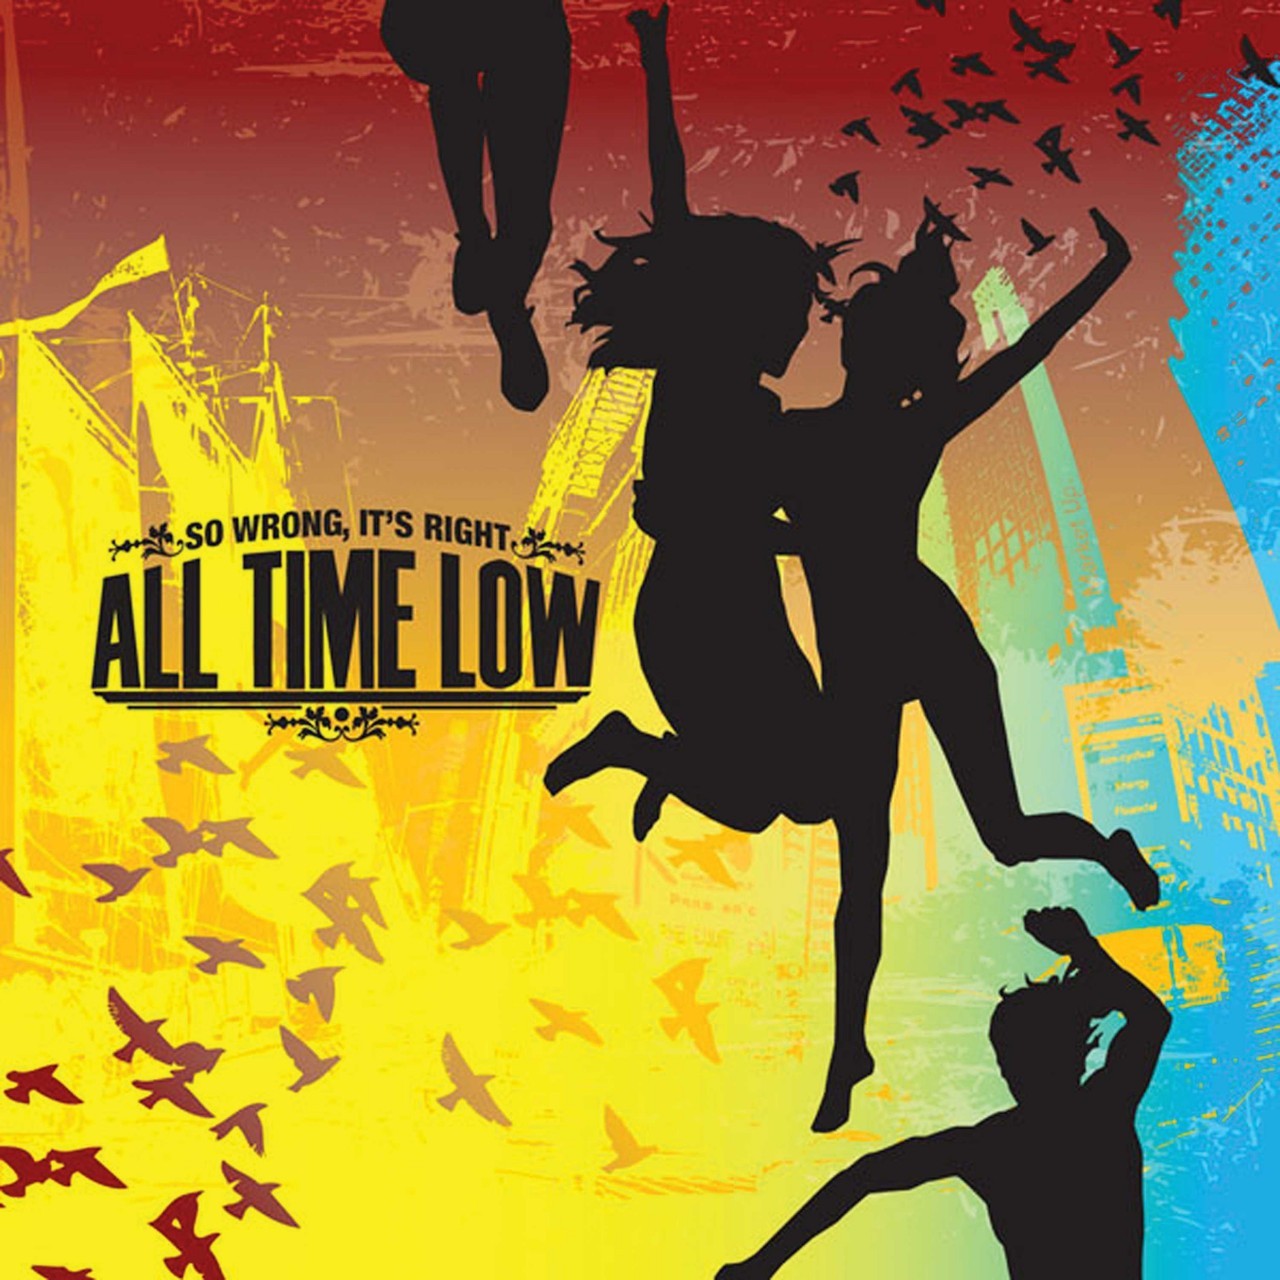 srcvinyl Canada All Time Low So Wrong, It's Right LP Vinyl Record